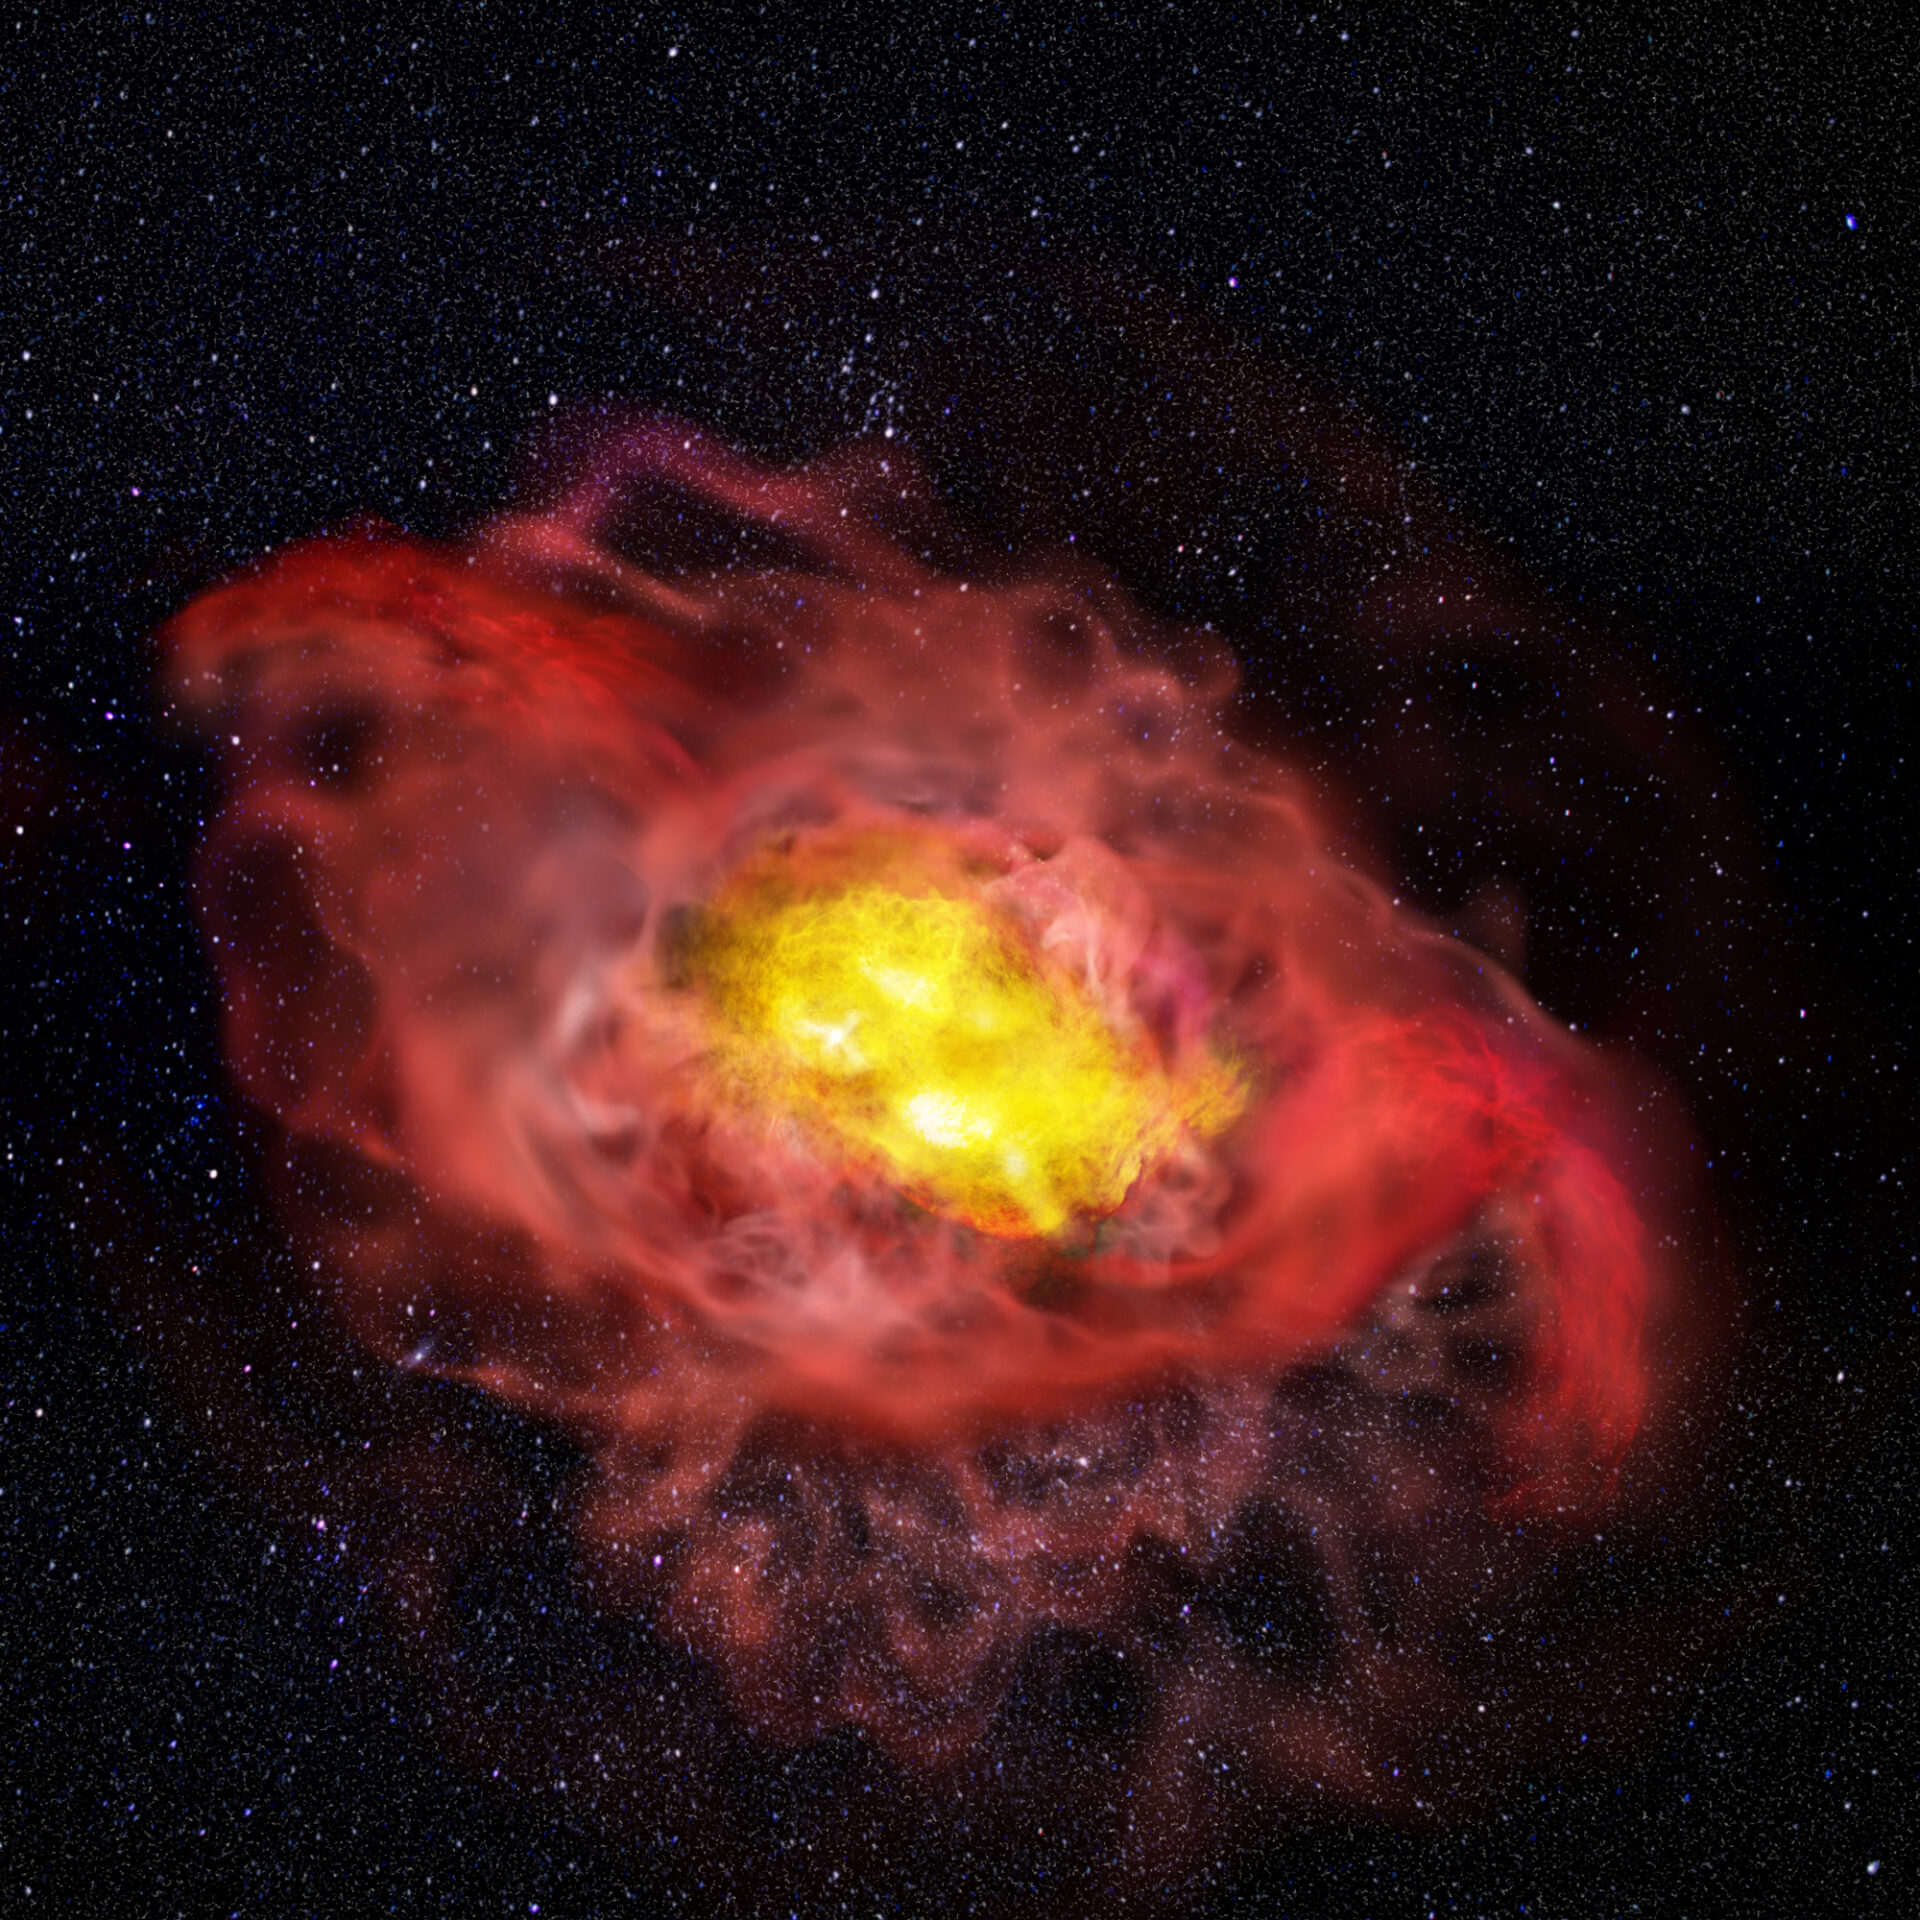 <p>This artist’s conception illustrates the previously unknown complexity of the young galaxy, A1689-zD1. Reaching far beyond the center of the galaxy, shown here in pink, is an abundant halo of cold carbon gas. For scientists, this uncommon feature indicates that the galaxy may be much larger than previously believed and that early stages of normal galaxy formation may have been more active and dynamic than theorized. To the upper left and lower right are outflows of hot, ionized gas pushing outward from the center of the galaxy, shown here in red. Scientists believe it is possible that these outflows have something, though they don’t yet know what, to do with the presence of cold carbon gas in the outer reaches of the galaxy. Credit: ALMA (ESO/NAOJ/NRAO), B. Saxton (NRAO/AUI/NSF)</p>
